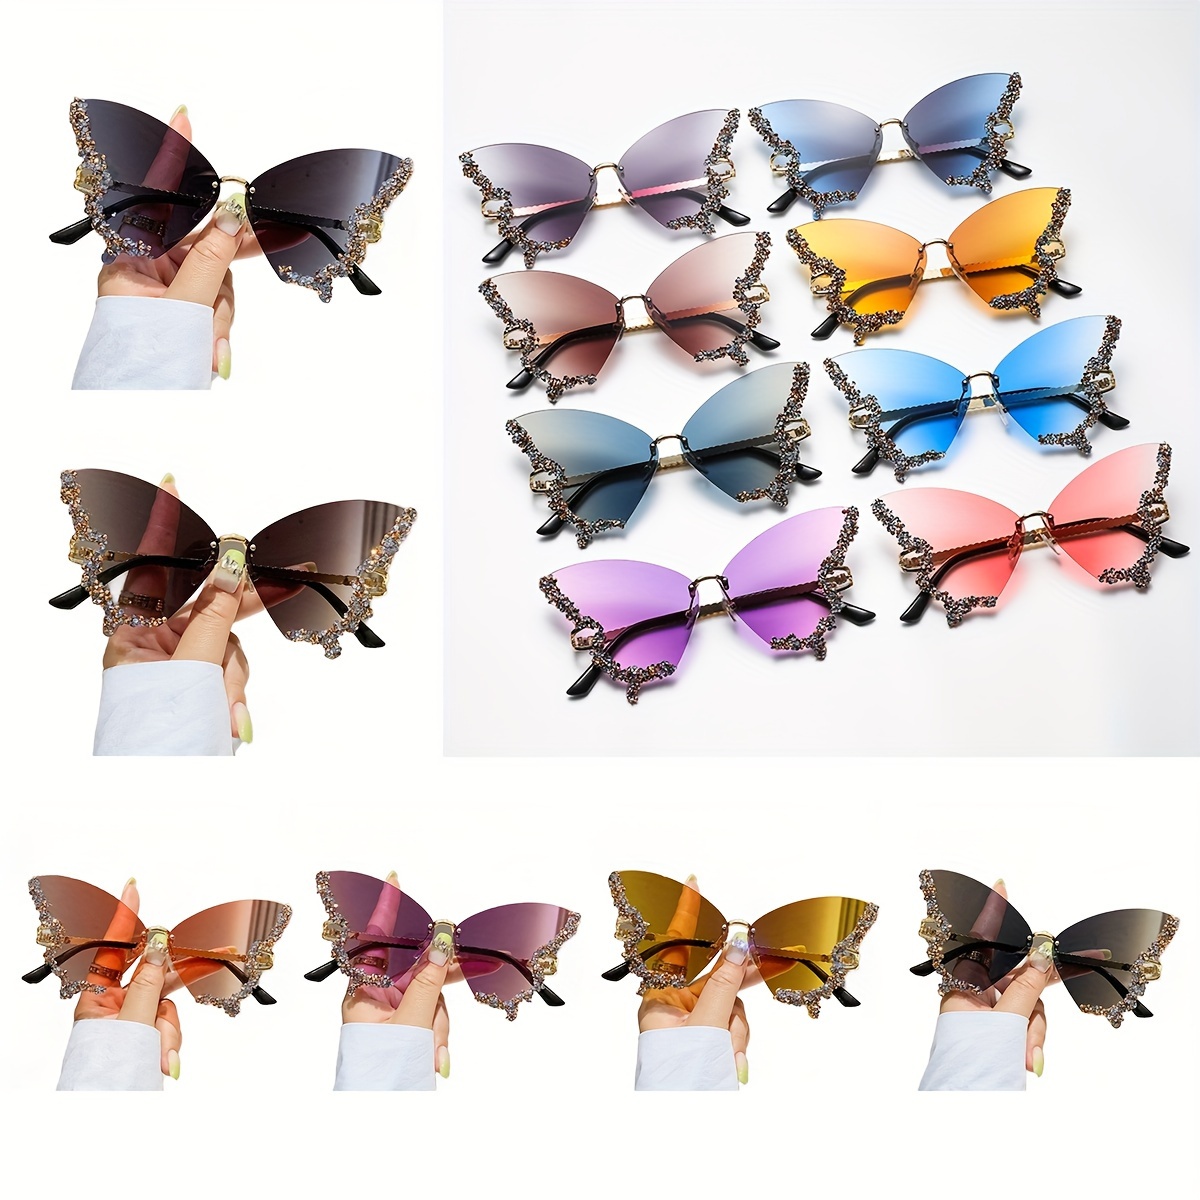 

Rimless Butterfly Glasses For Women, Bling Rhinestone, Gradient Decorative Shades, Lightweight Silicone Nose Rest, Curved Leg Design, Costume Party Prom Fashion Accessories